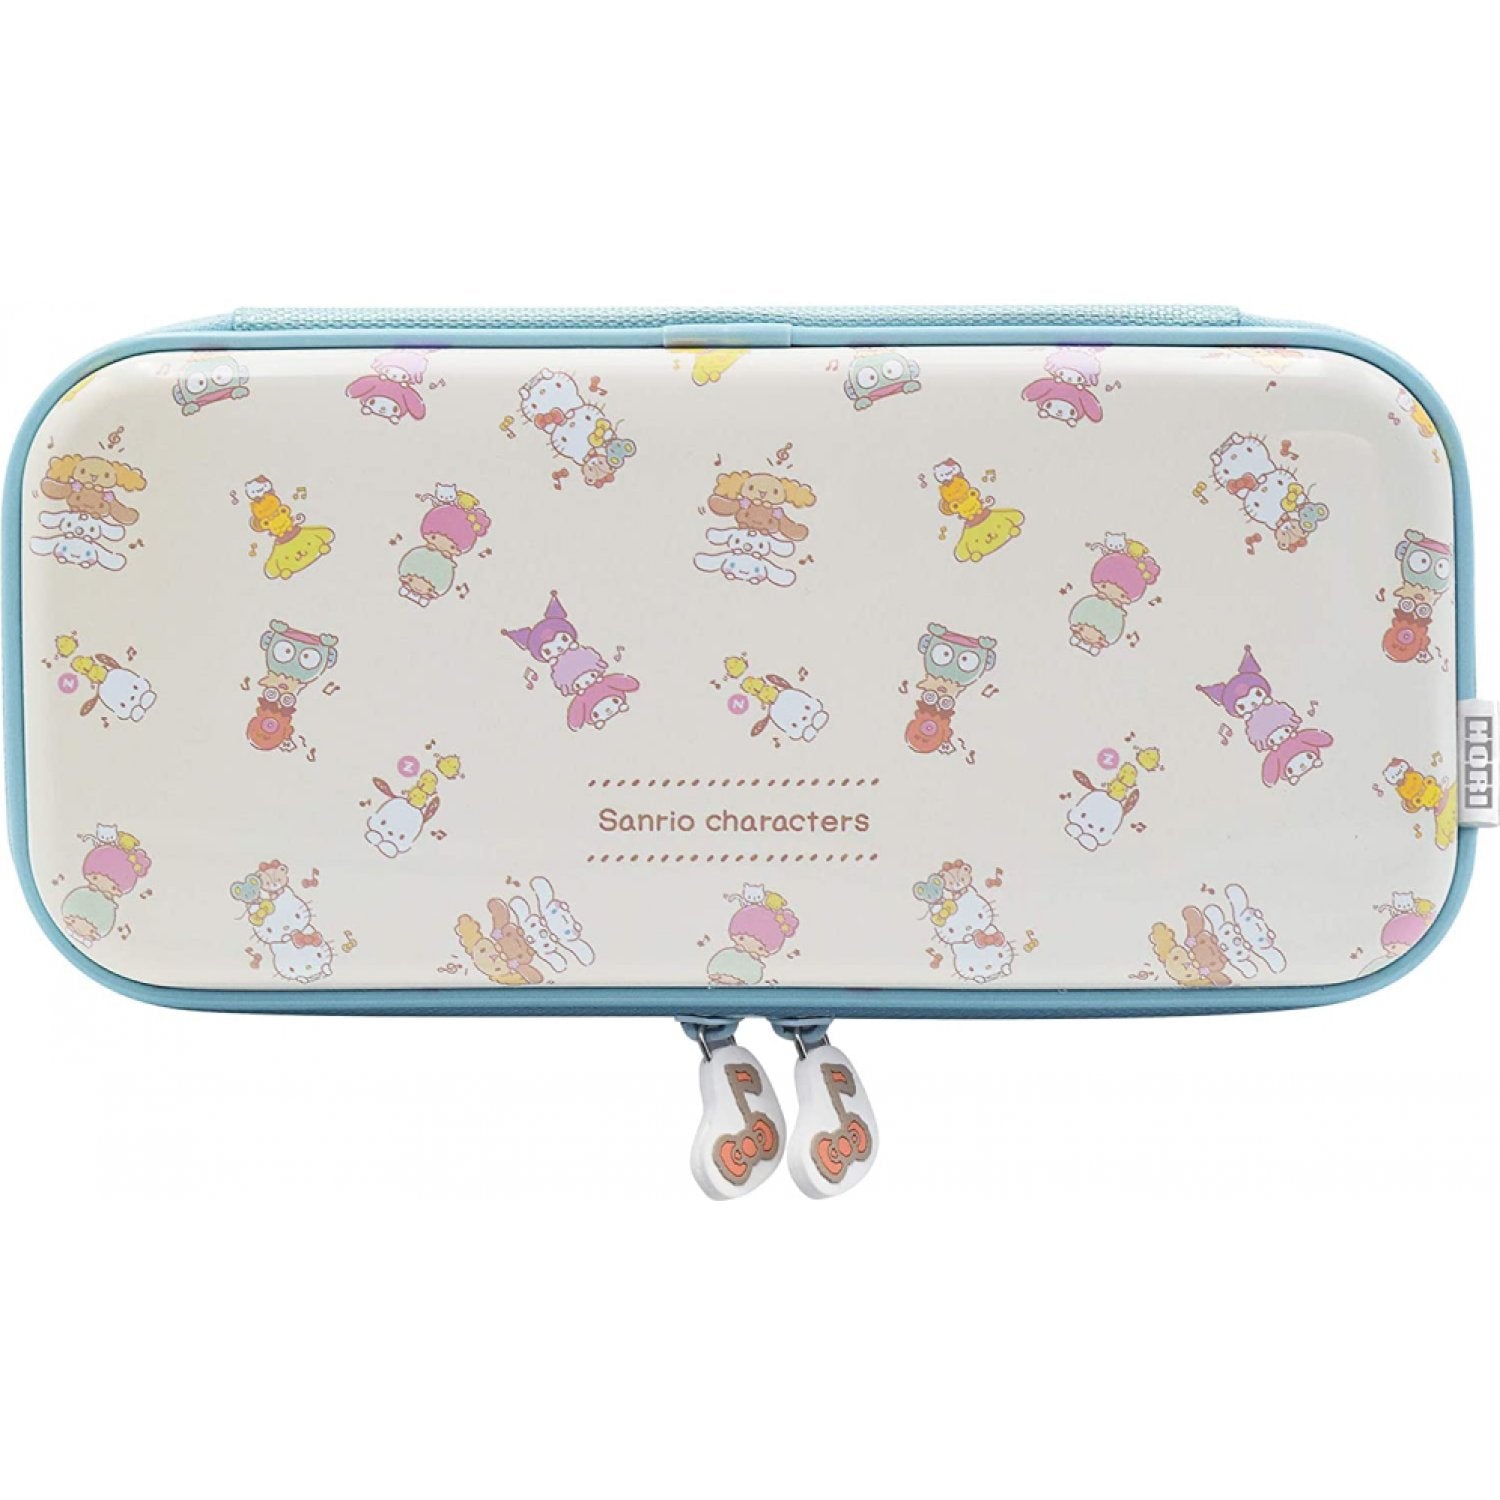 HORI NSW Sanrio Characters Hybrid Pouch (AD25-002A)